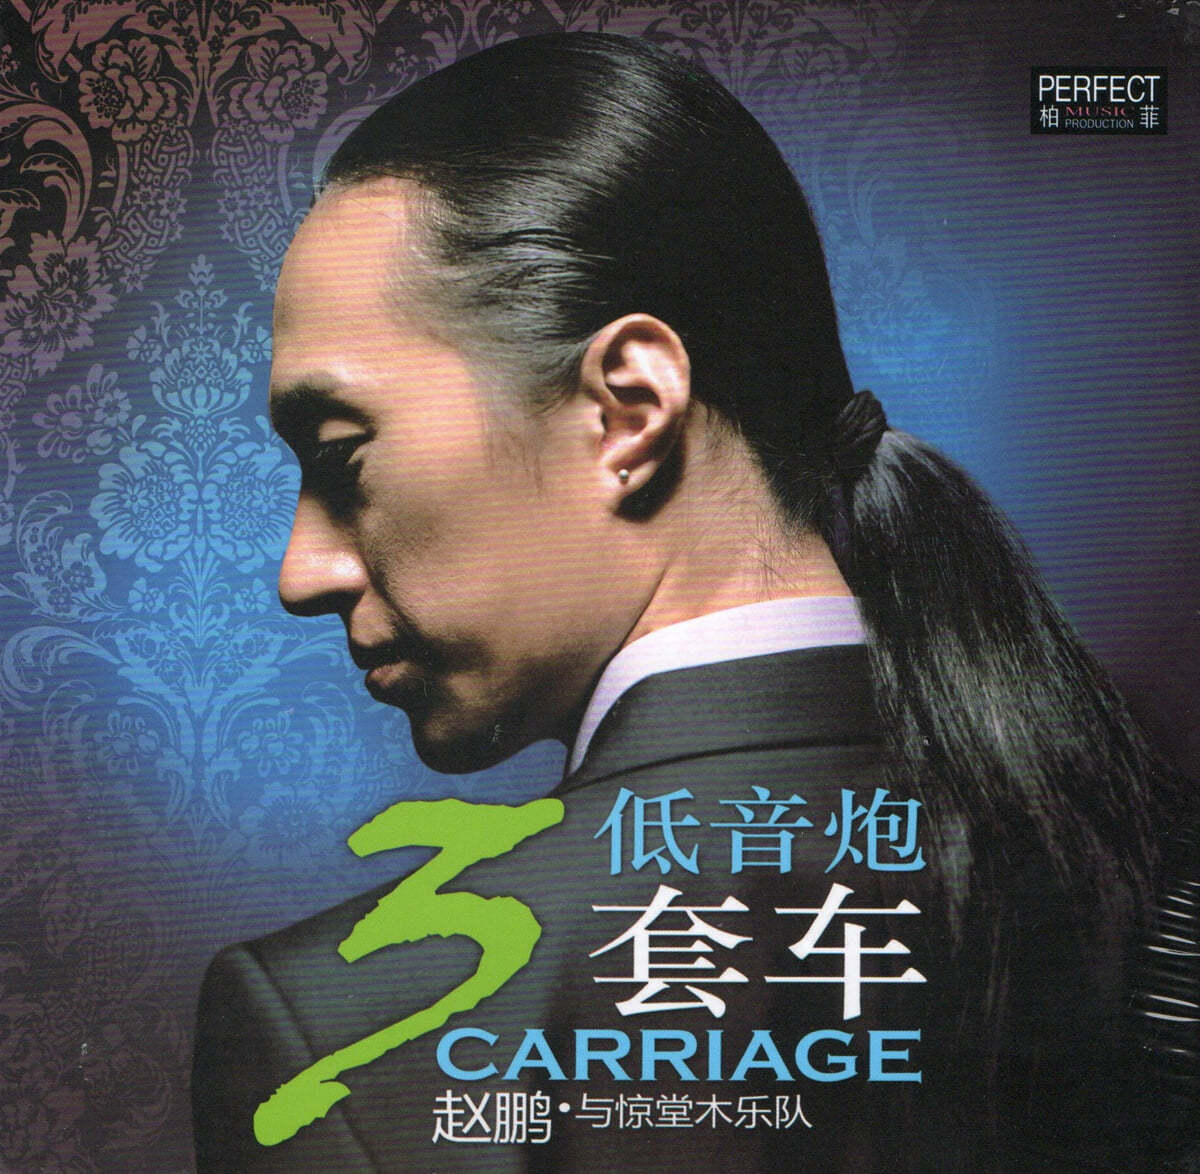 Zhao Peng (조붕) - 3 Carriage 